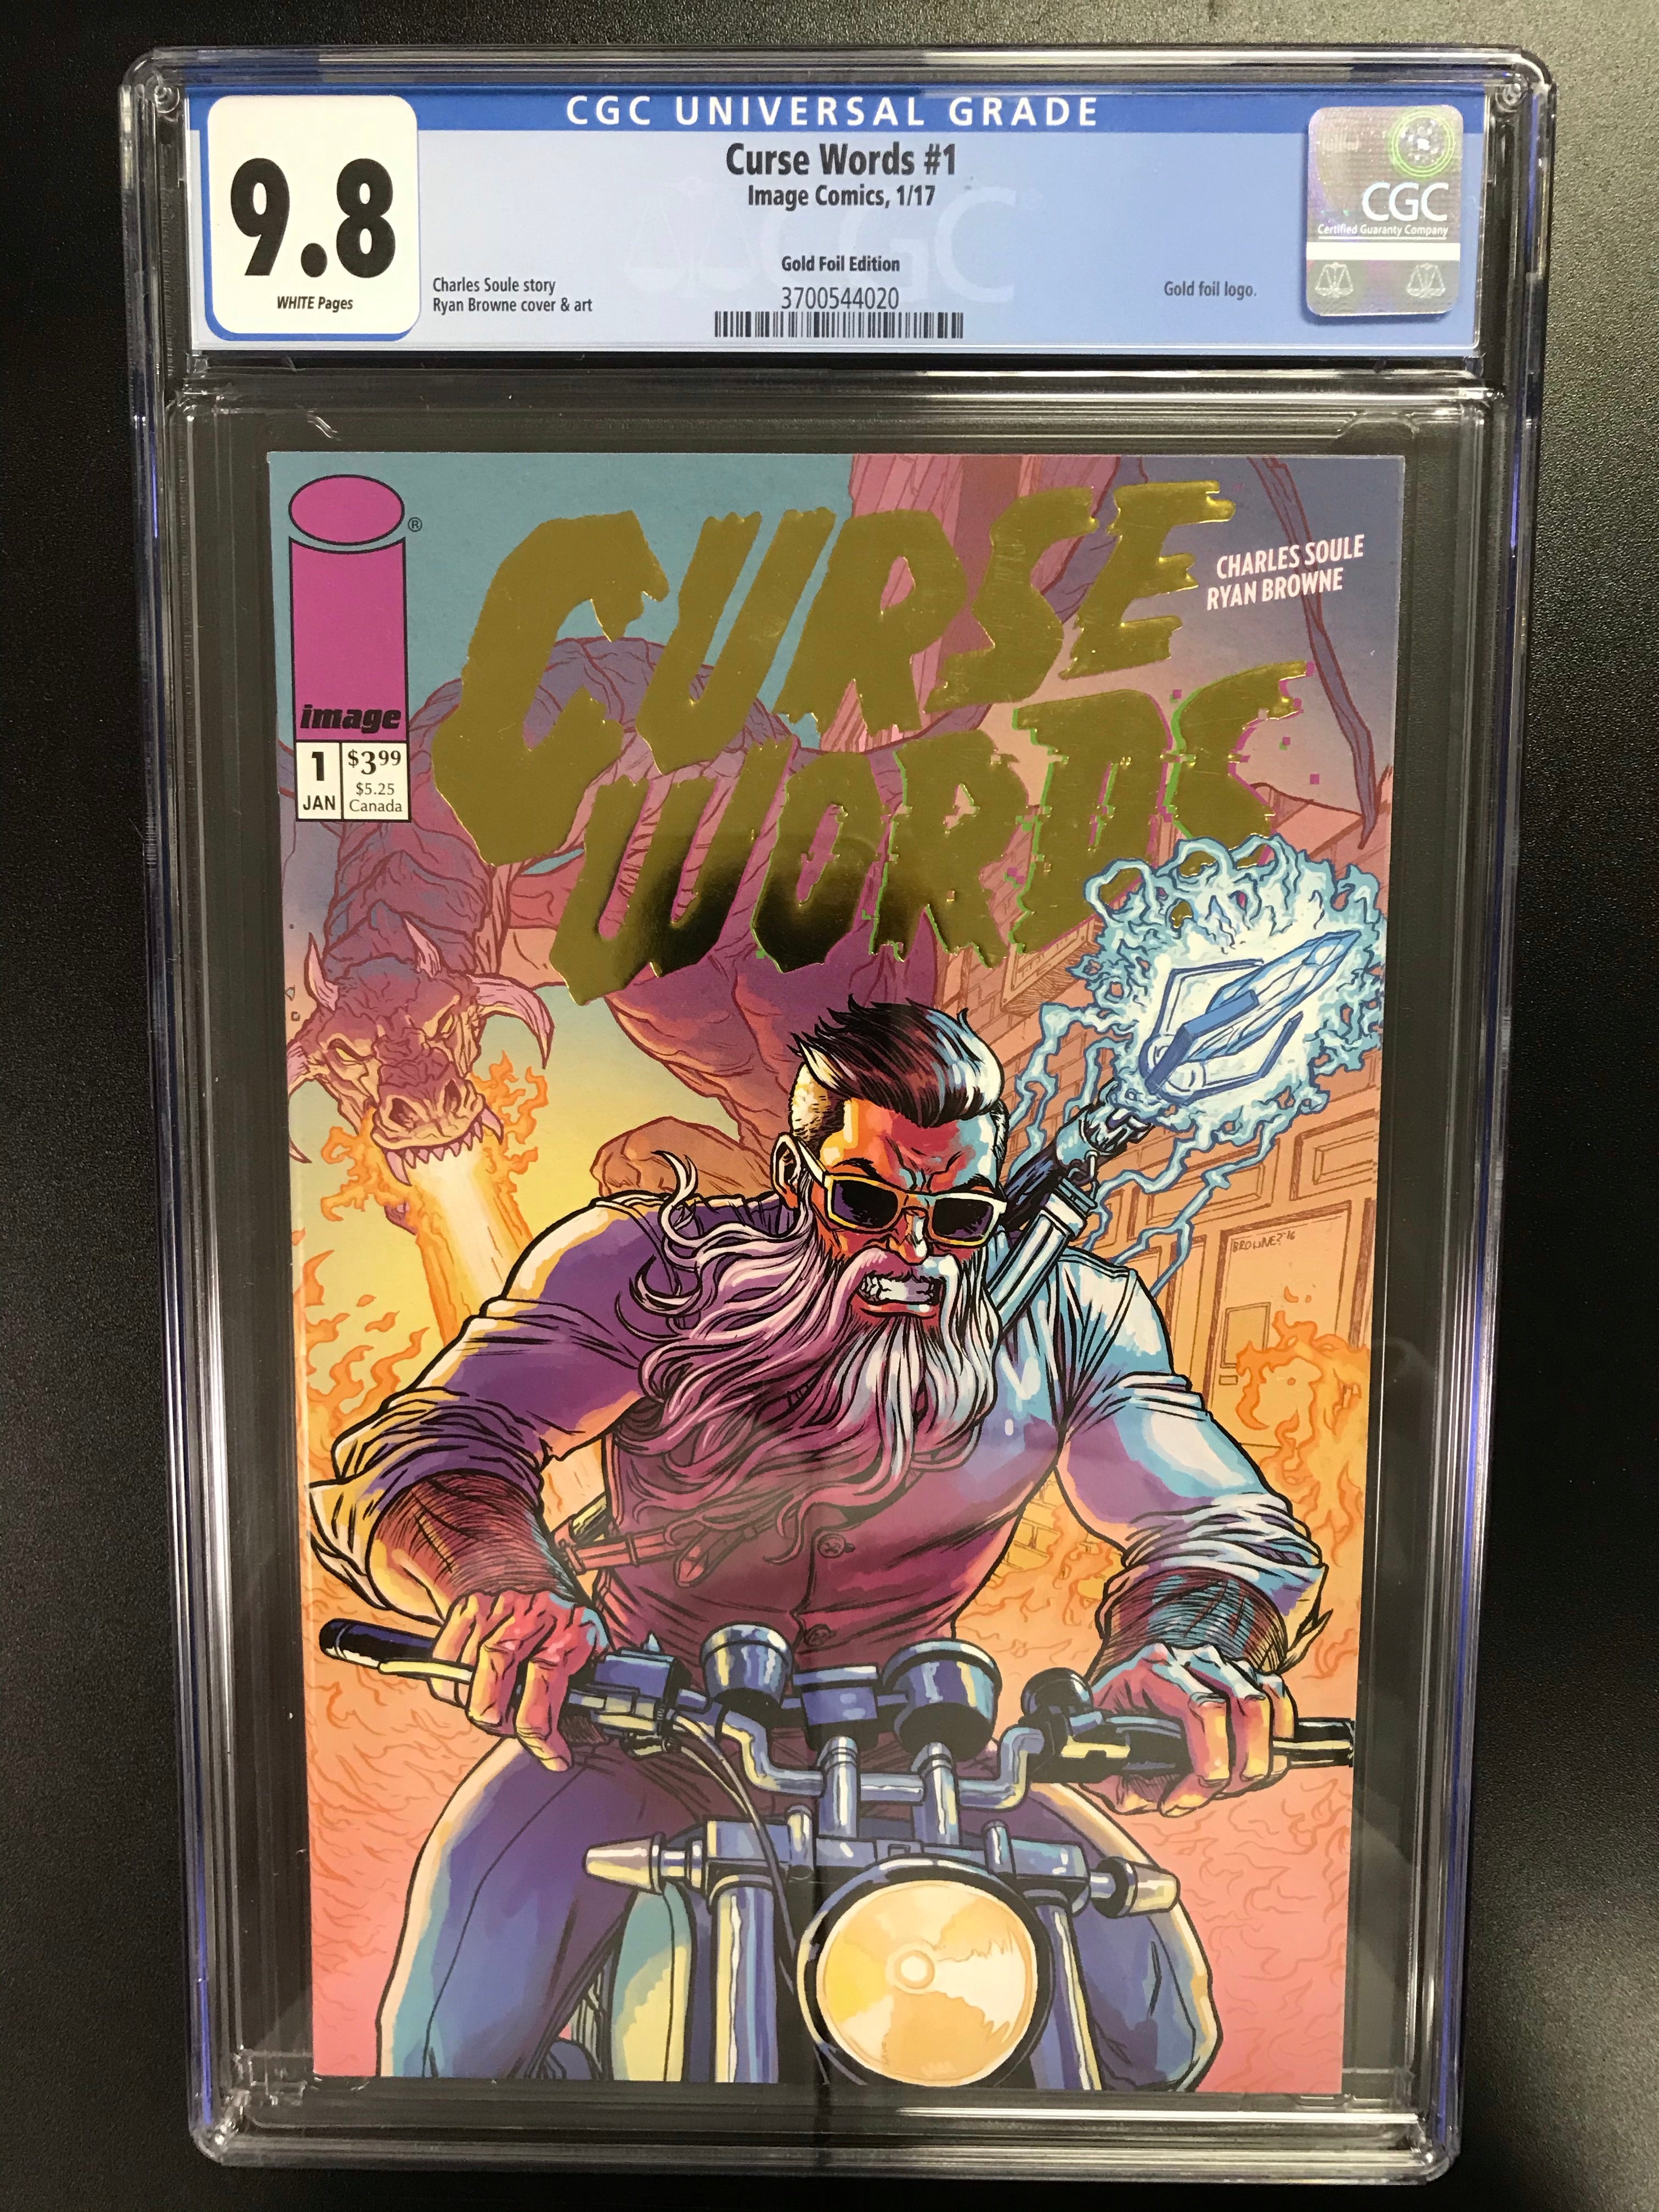 CURSE WORDS #1 GOLD FOIL ONE PER STORE VARIANT CGC 9.8